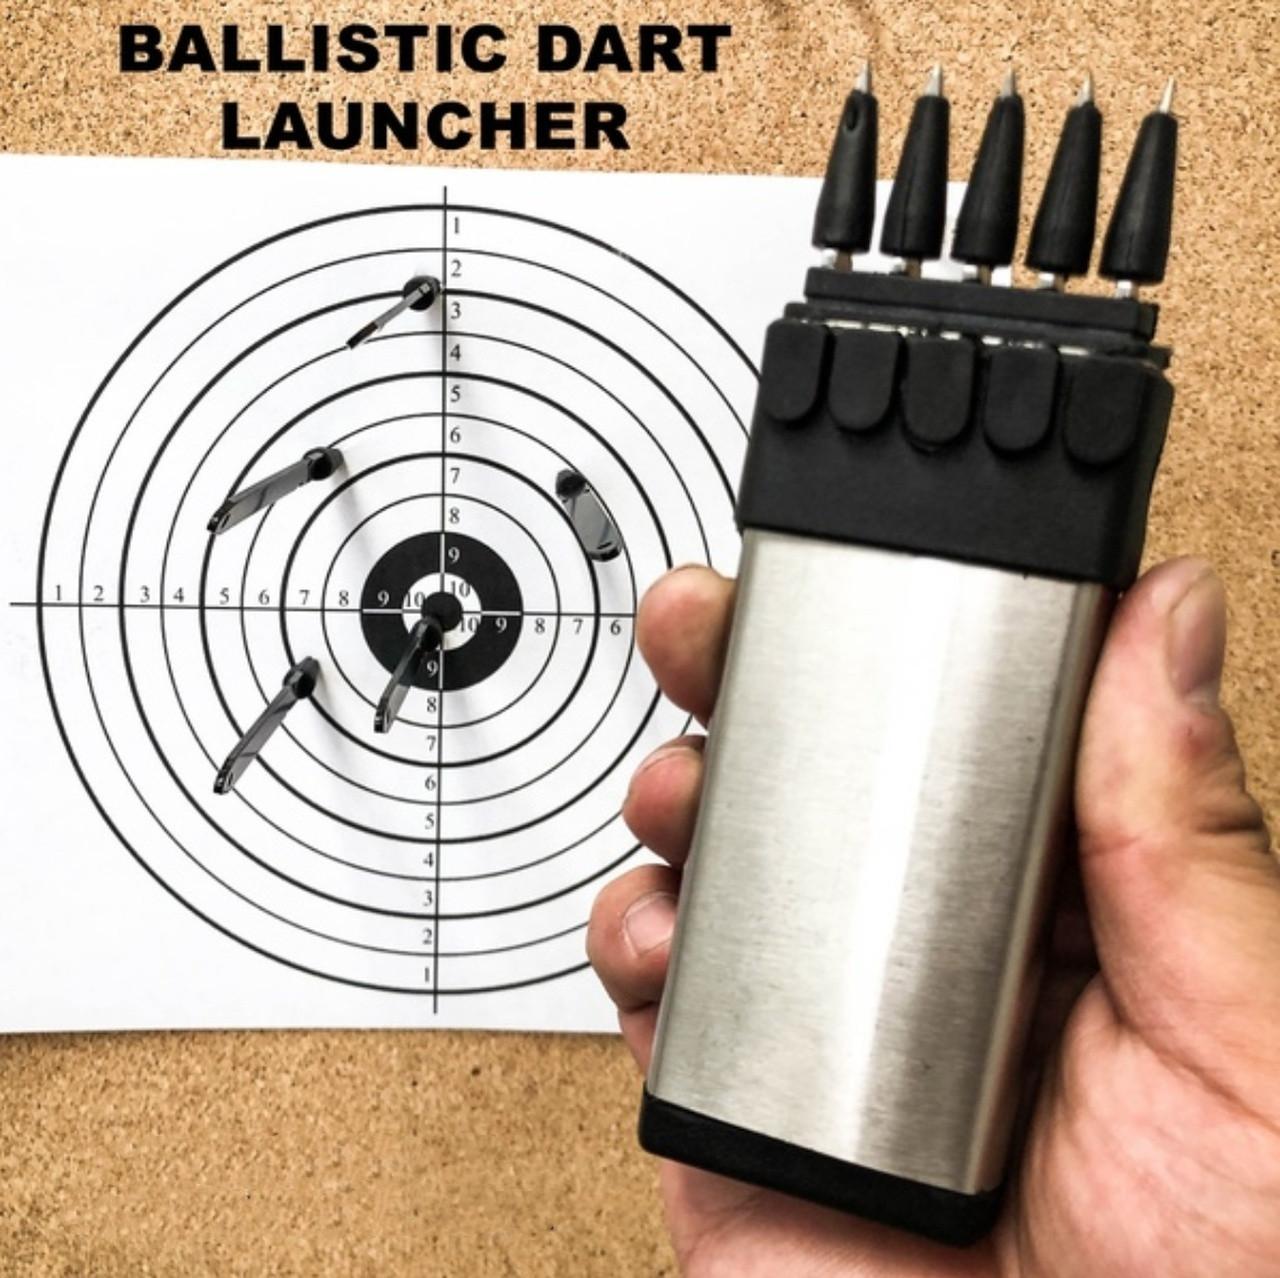 Dart Shooting Ballistic Darts Launcher Knives, Outdoor camping Survival Self Defense hunting Tool Adult Gifts Toys от DHgate WW